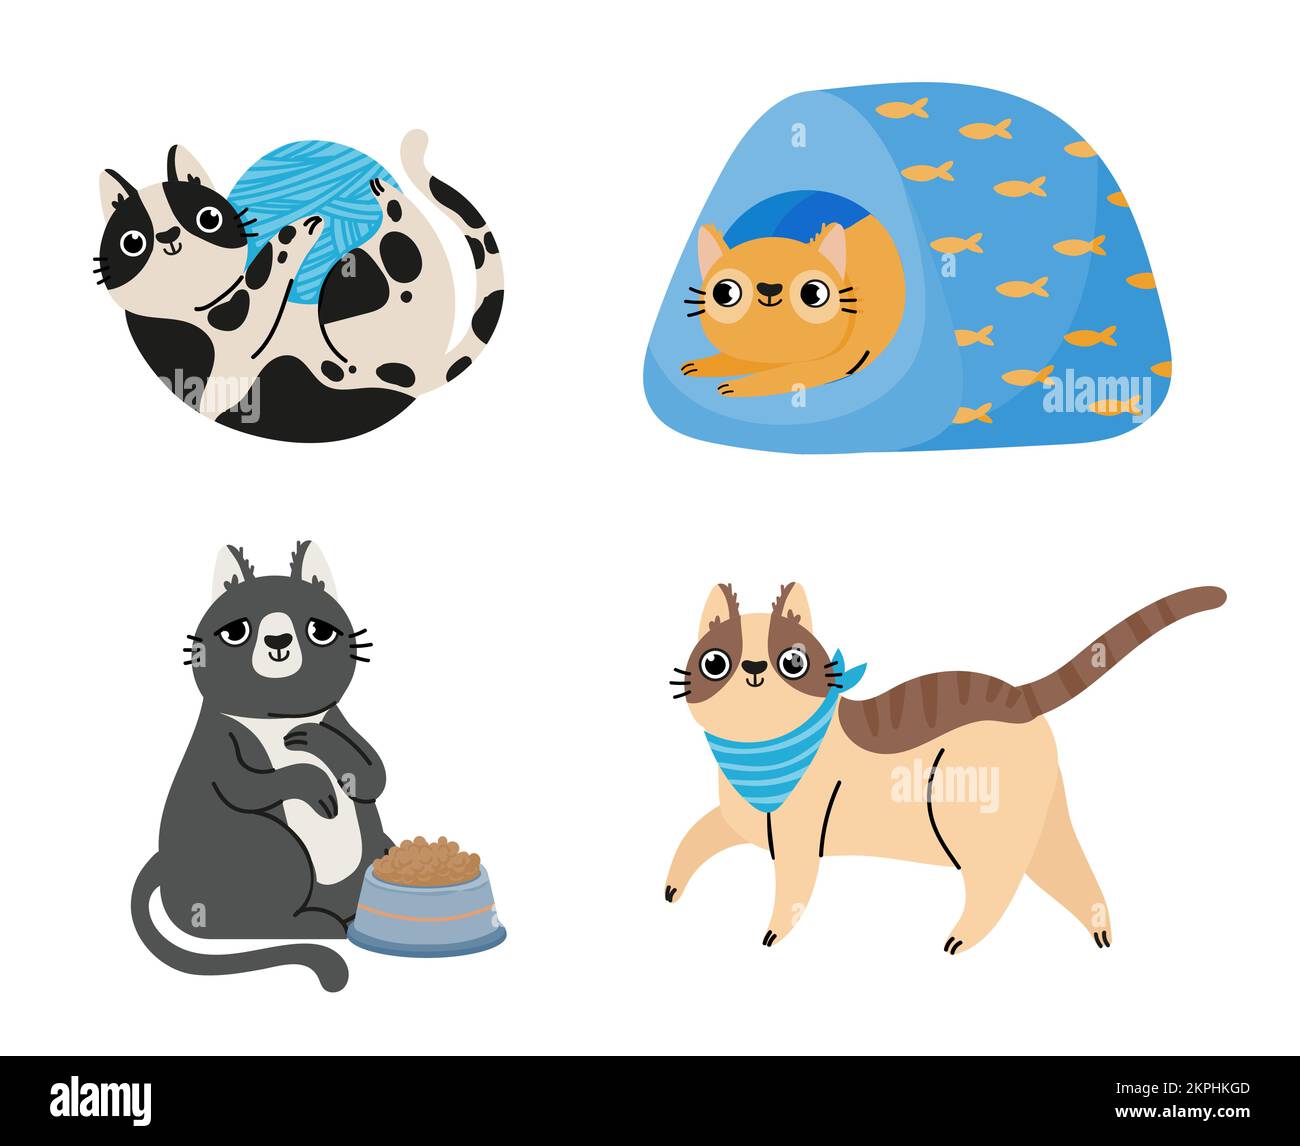 Cartoon cats. Cute animals sitting, lying in bed, walking and playing with ball of yarn. Pets eating and relaxing. Funny furry domestic characters in Stock Vector